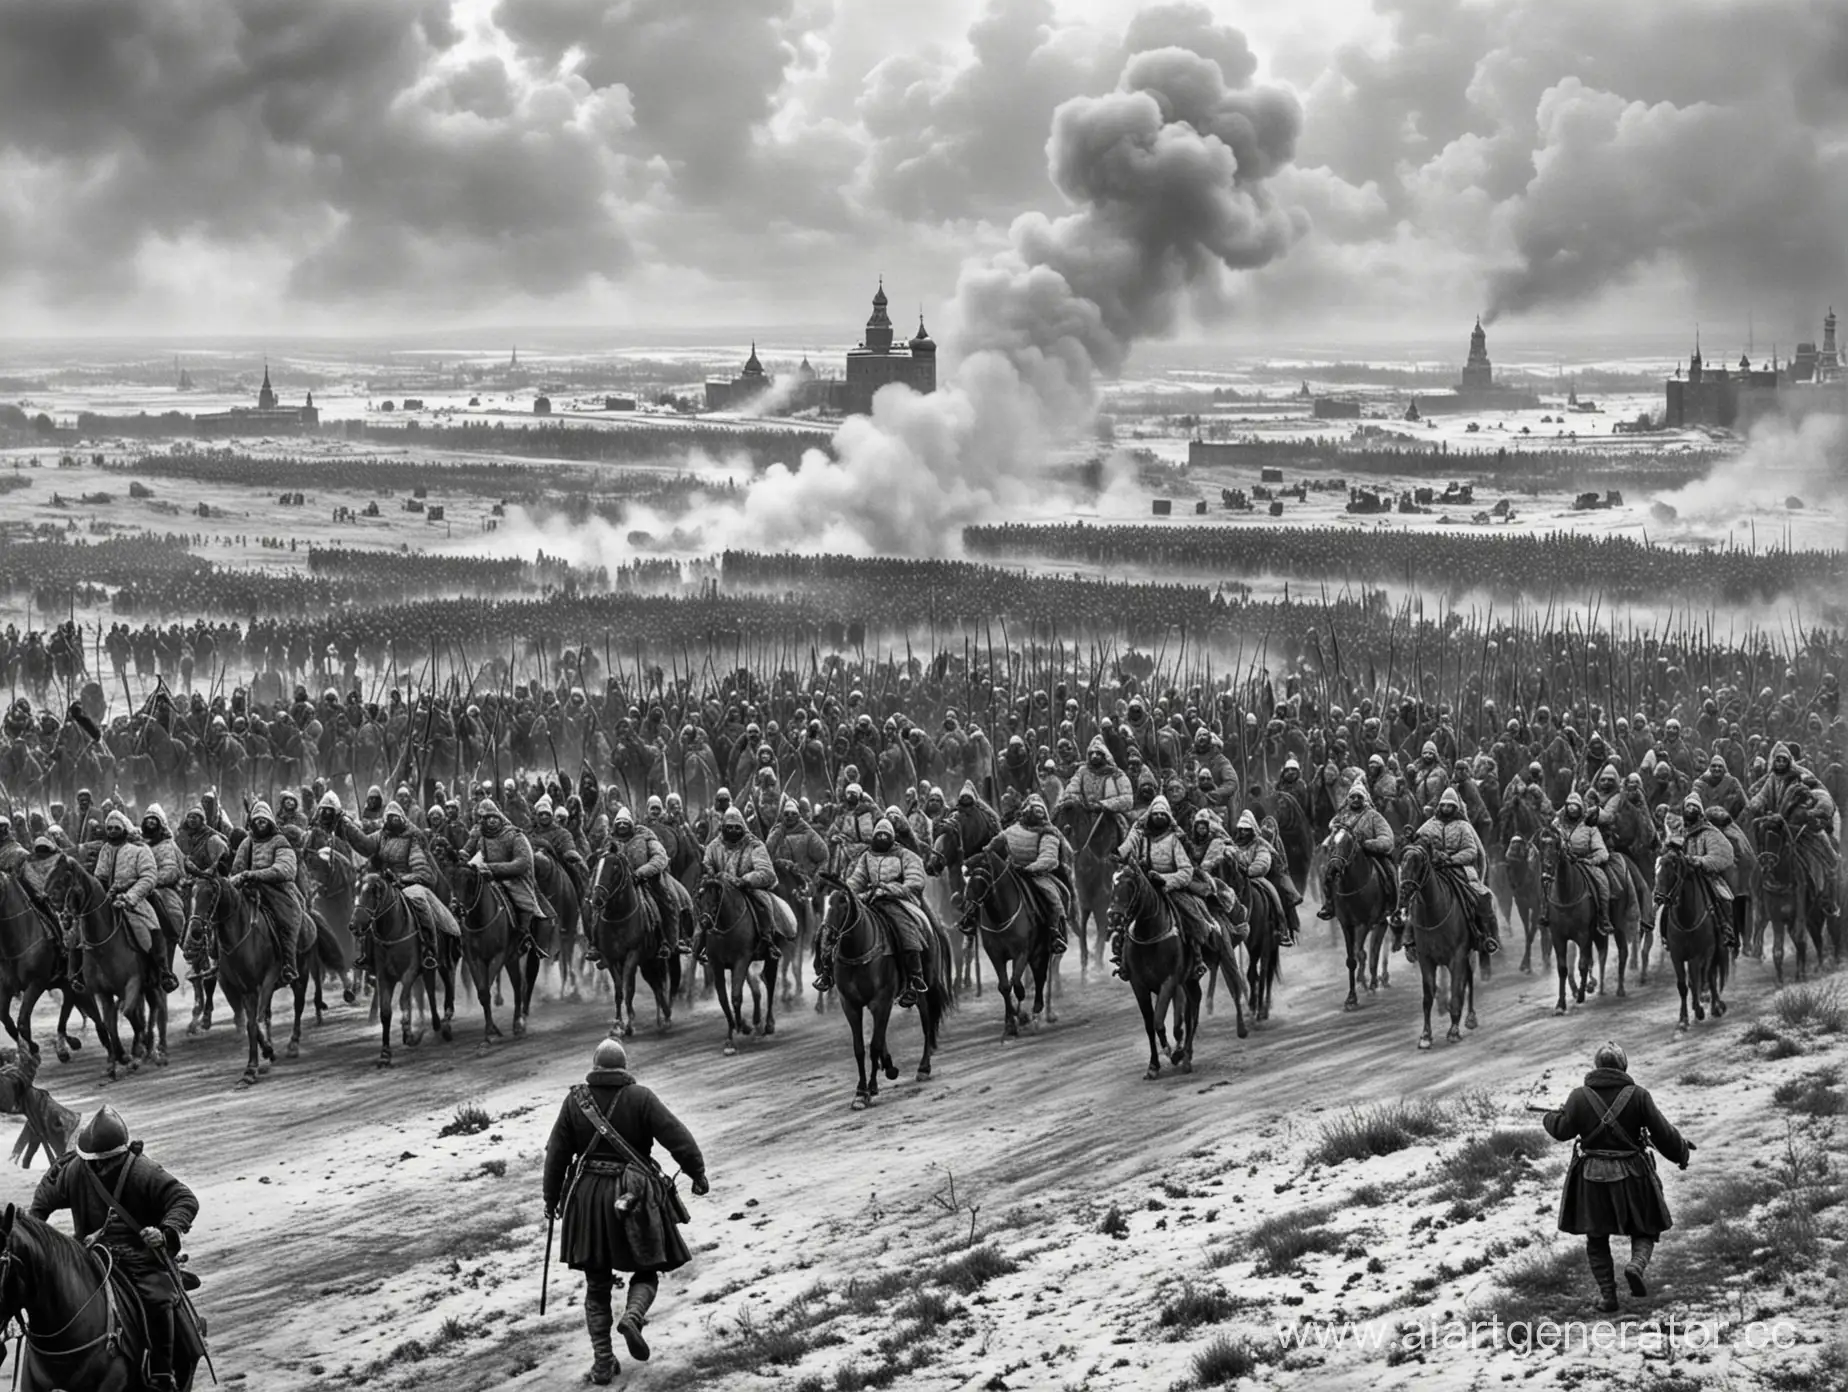 Moscow-1612-War-Scene-with-PolishLithuanian-Army-in-Black-and-White